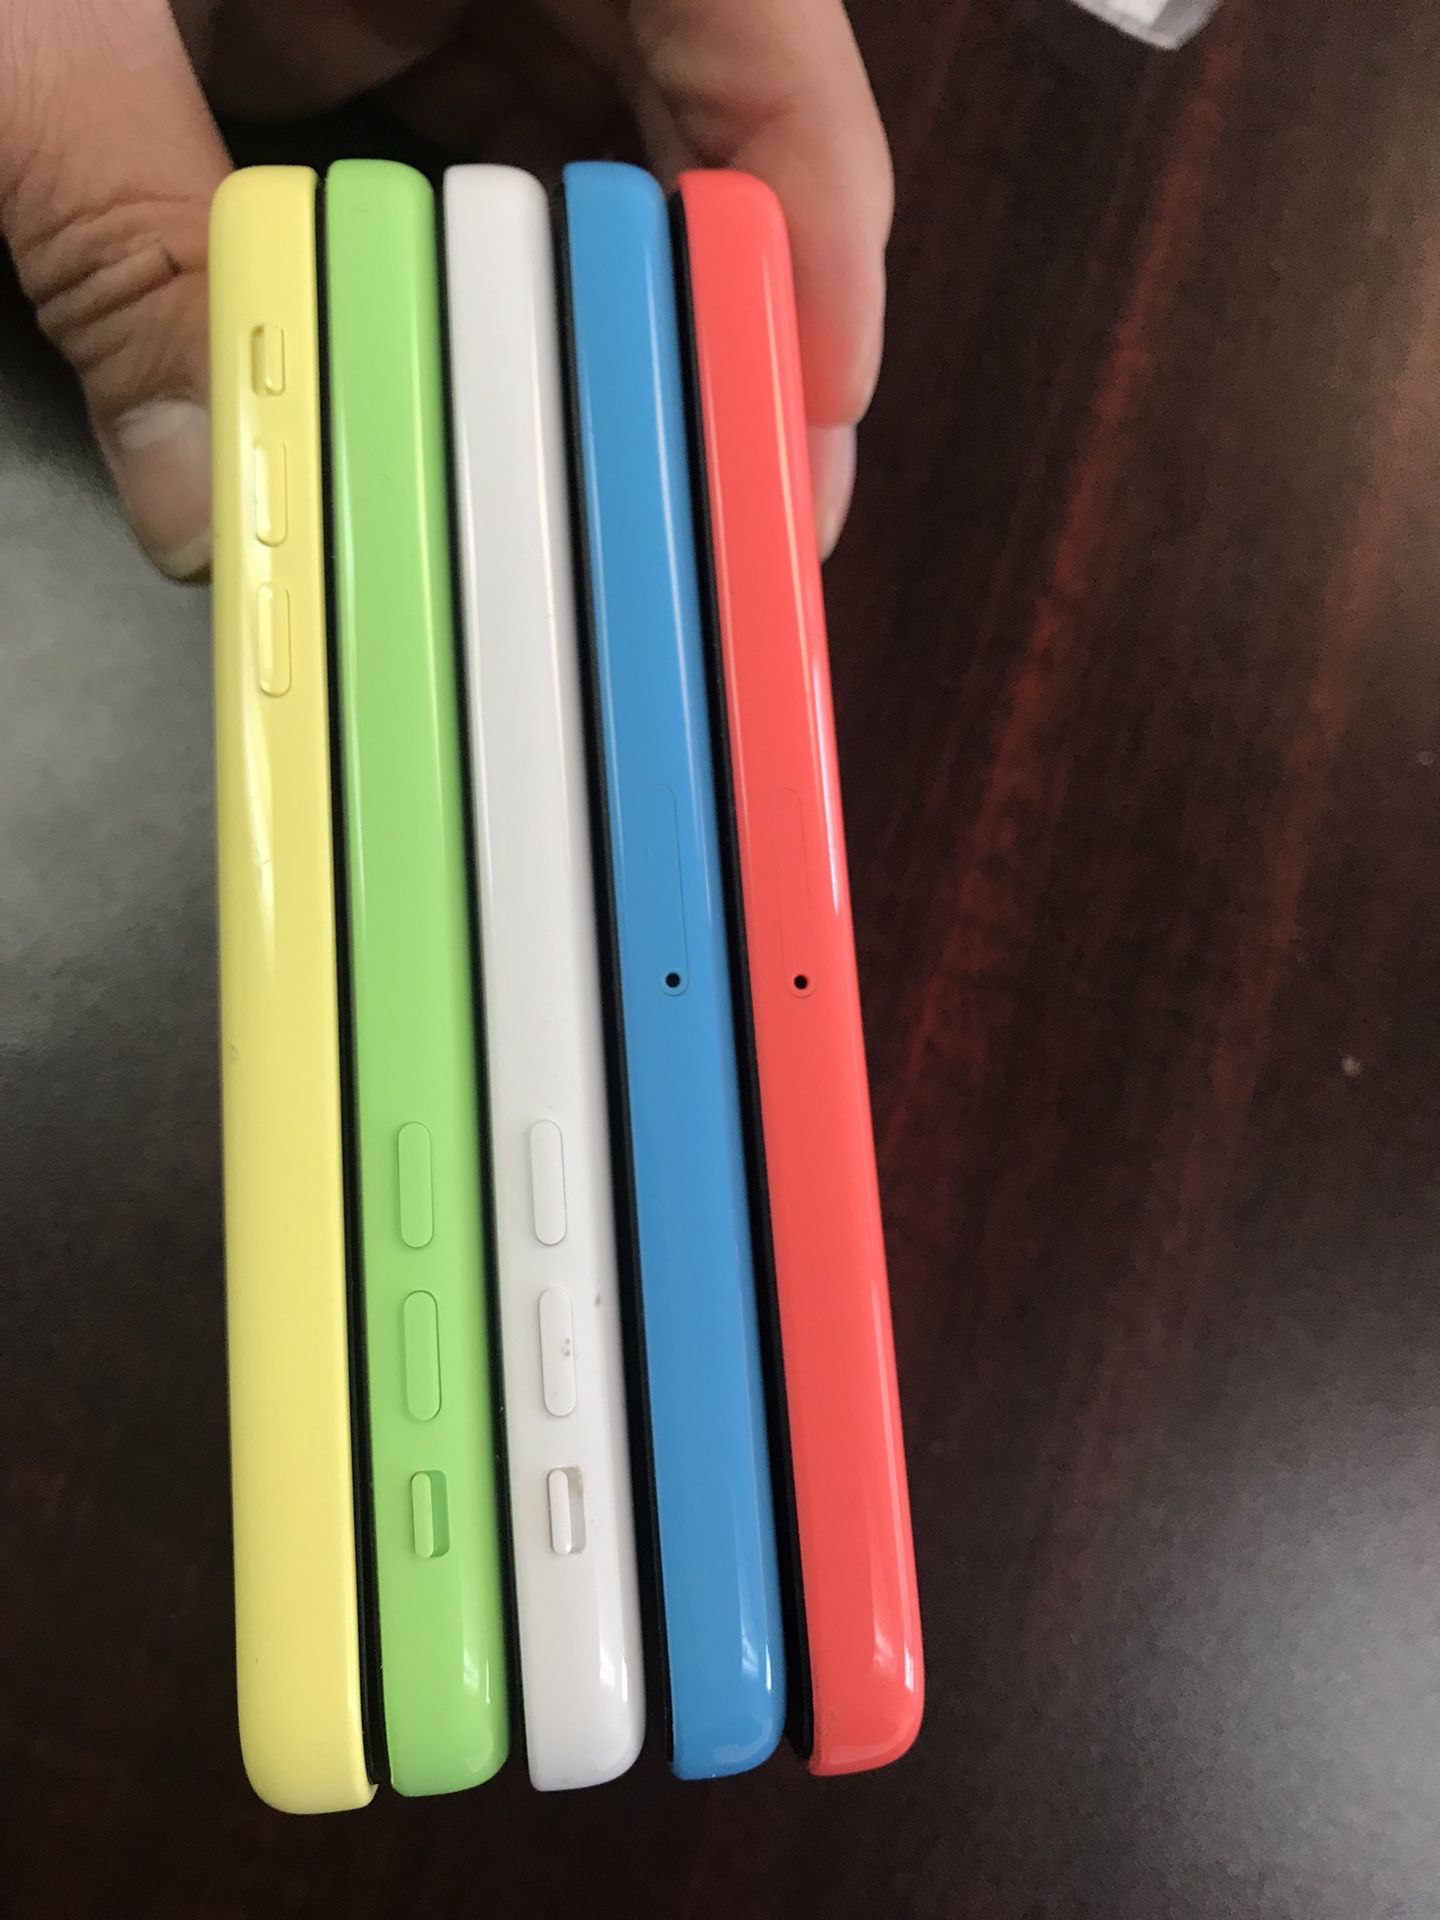 Unlocked IPhone 5c 16gb $90 for each